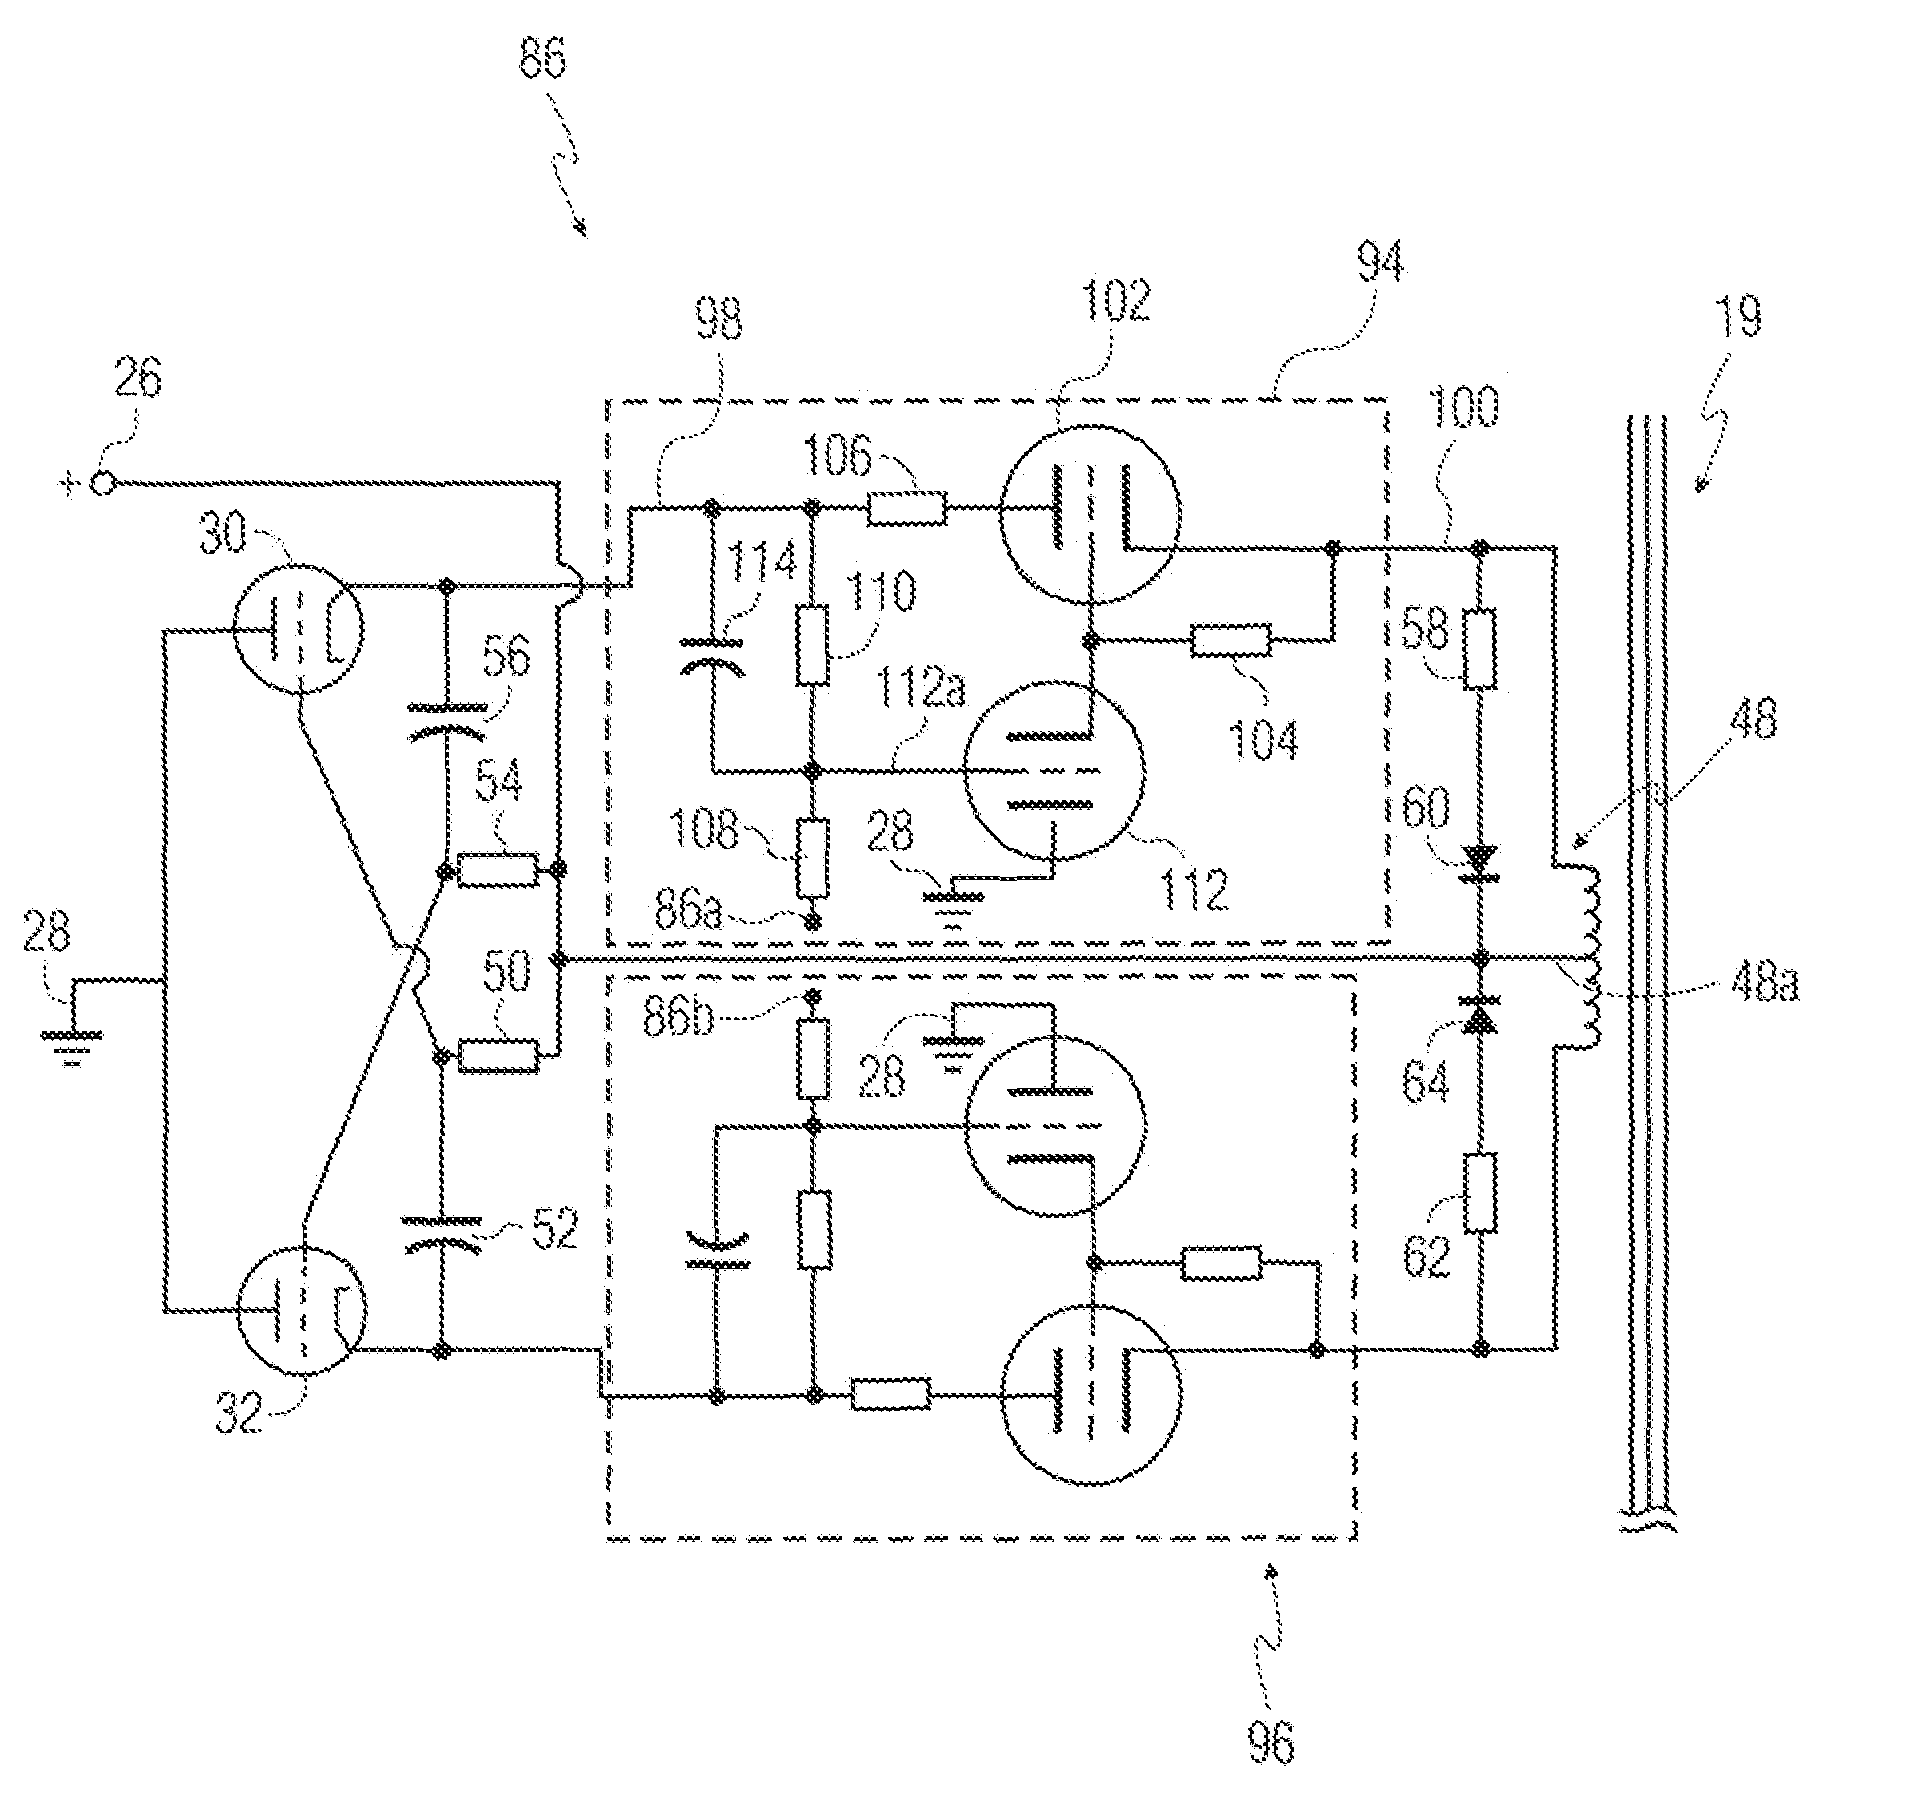 High voltage electron tube inverter with individual output phase current control